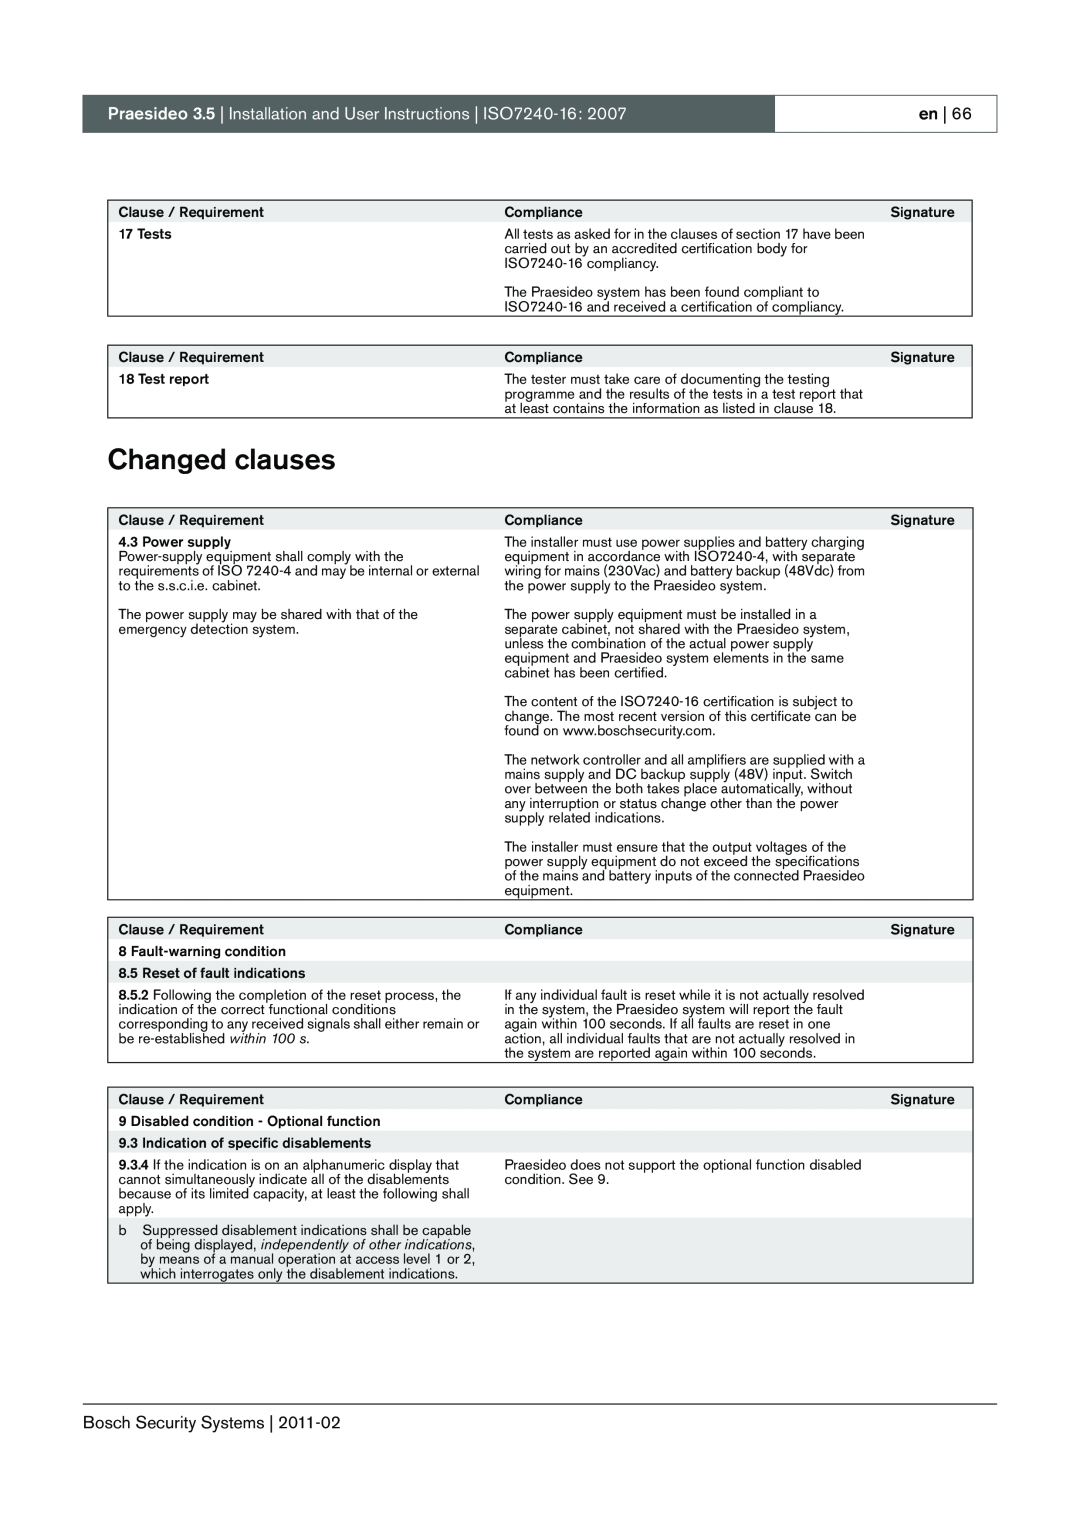 Bosch Appliances 3.5 manual Changed clauses 